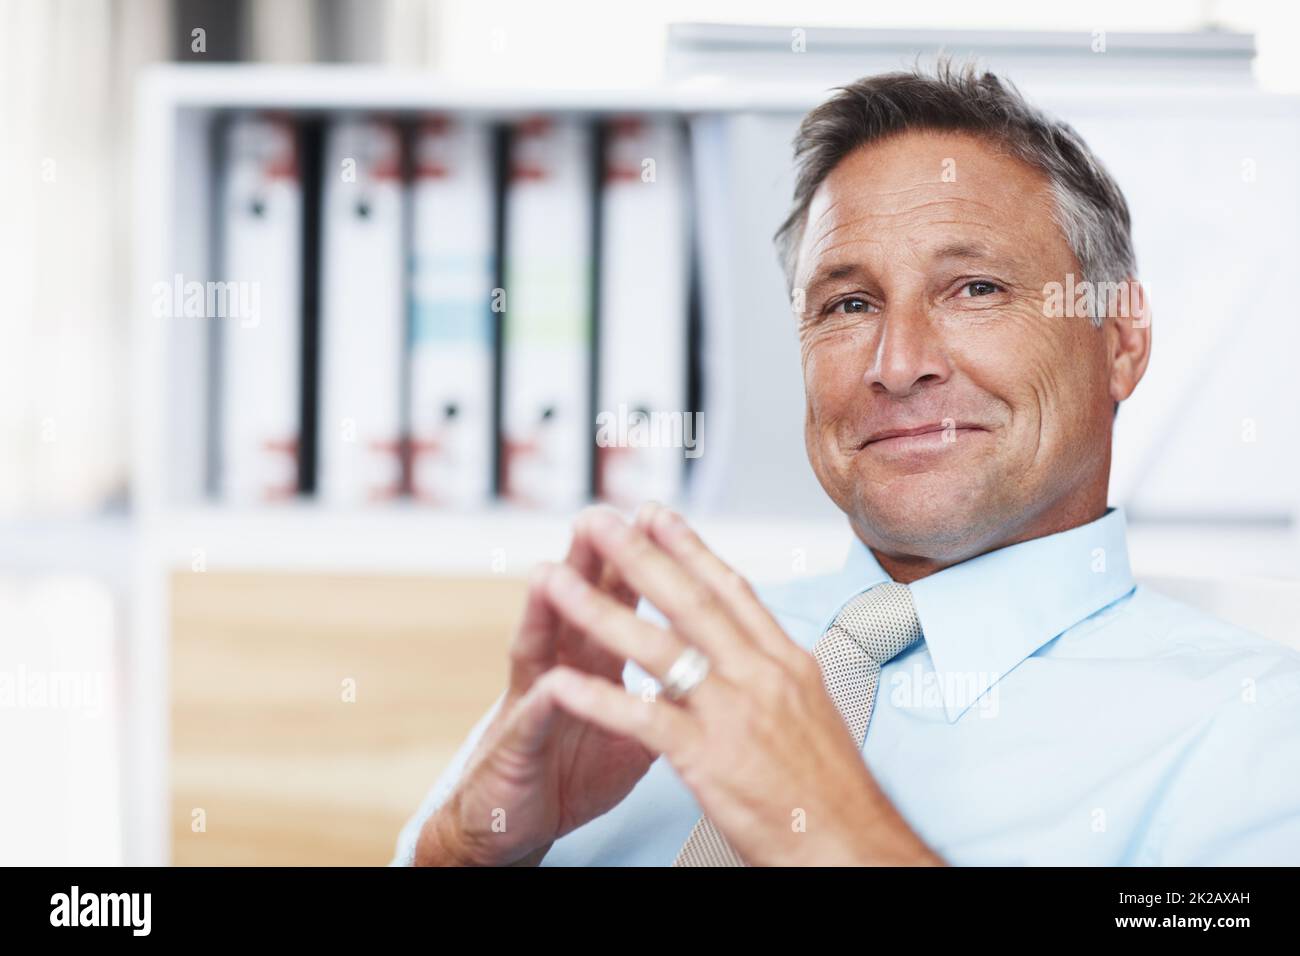 Your idea is brilliant. Portrait of a respected business manager sitting at his desk with steepled hands. Stock Photo